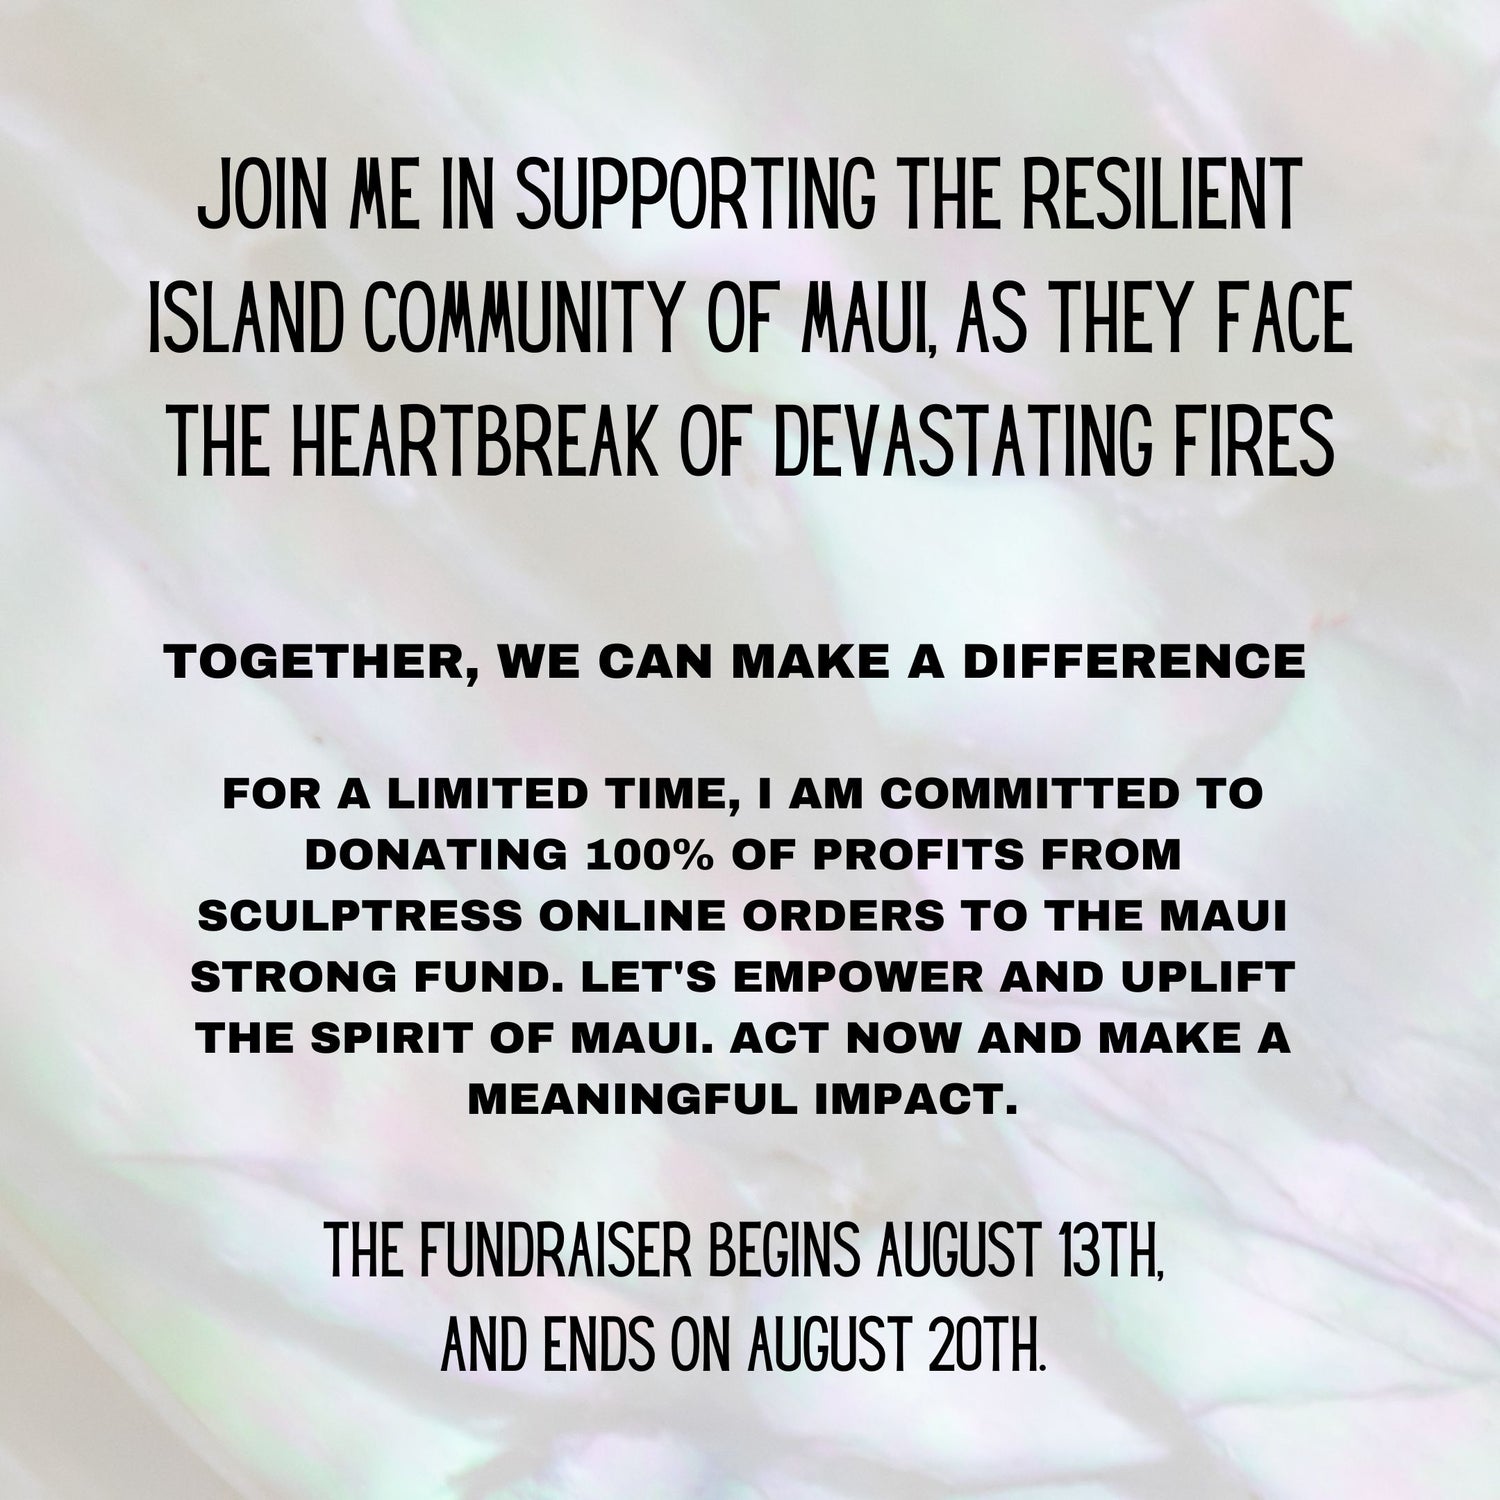 Let's Stand with Maui in the Face of Devastating Fires